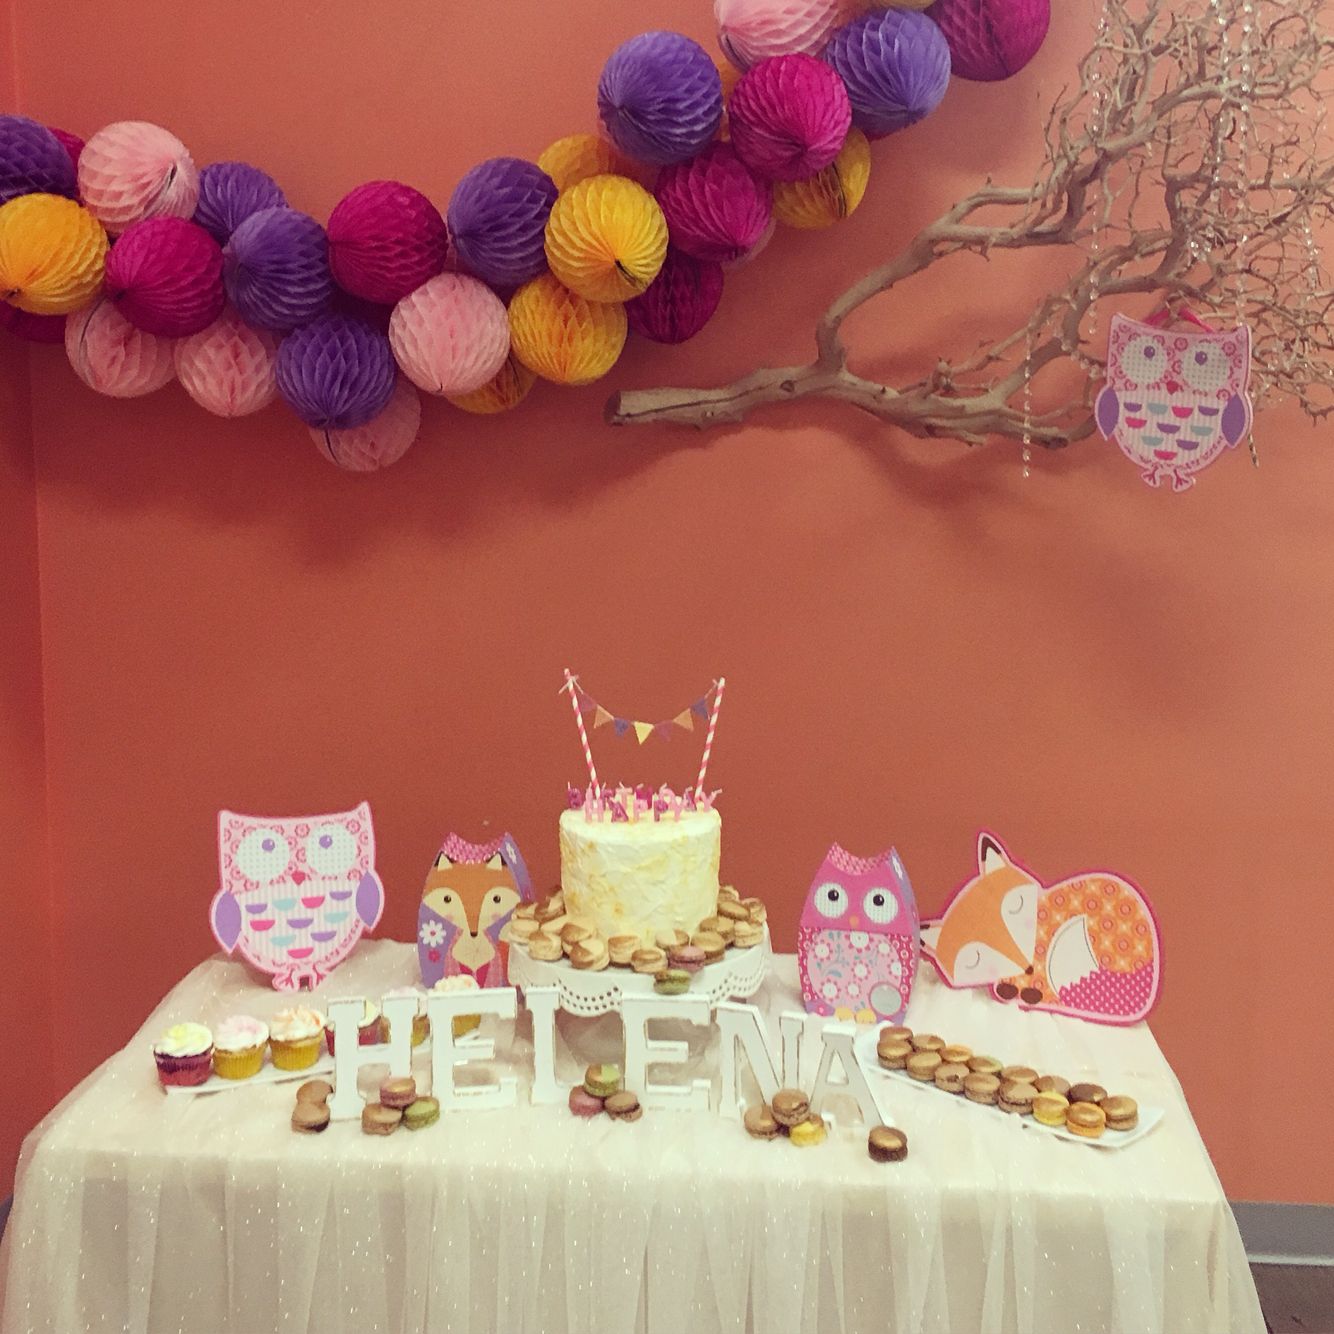 Dainty Owl/Fox themed party for my 8 year